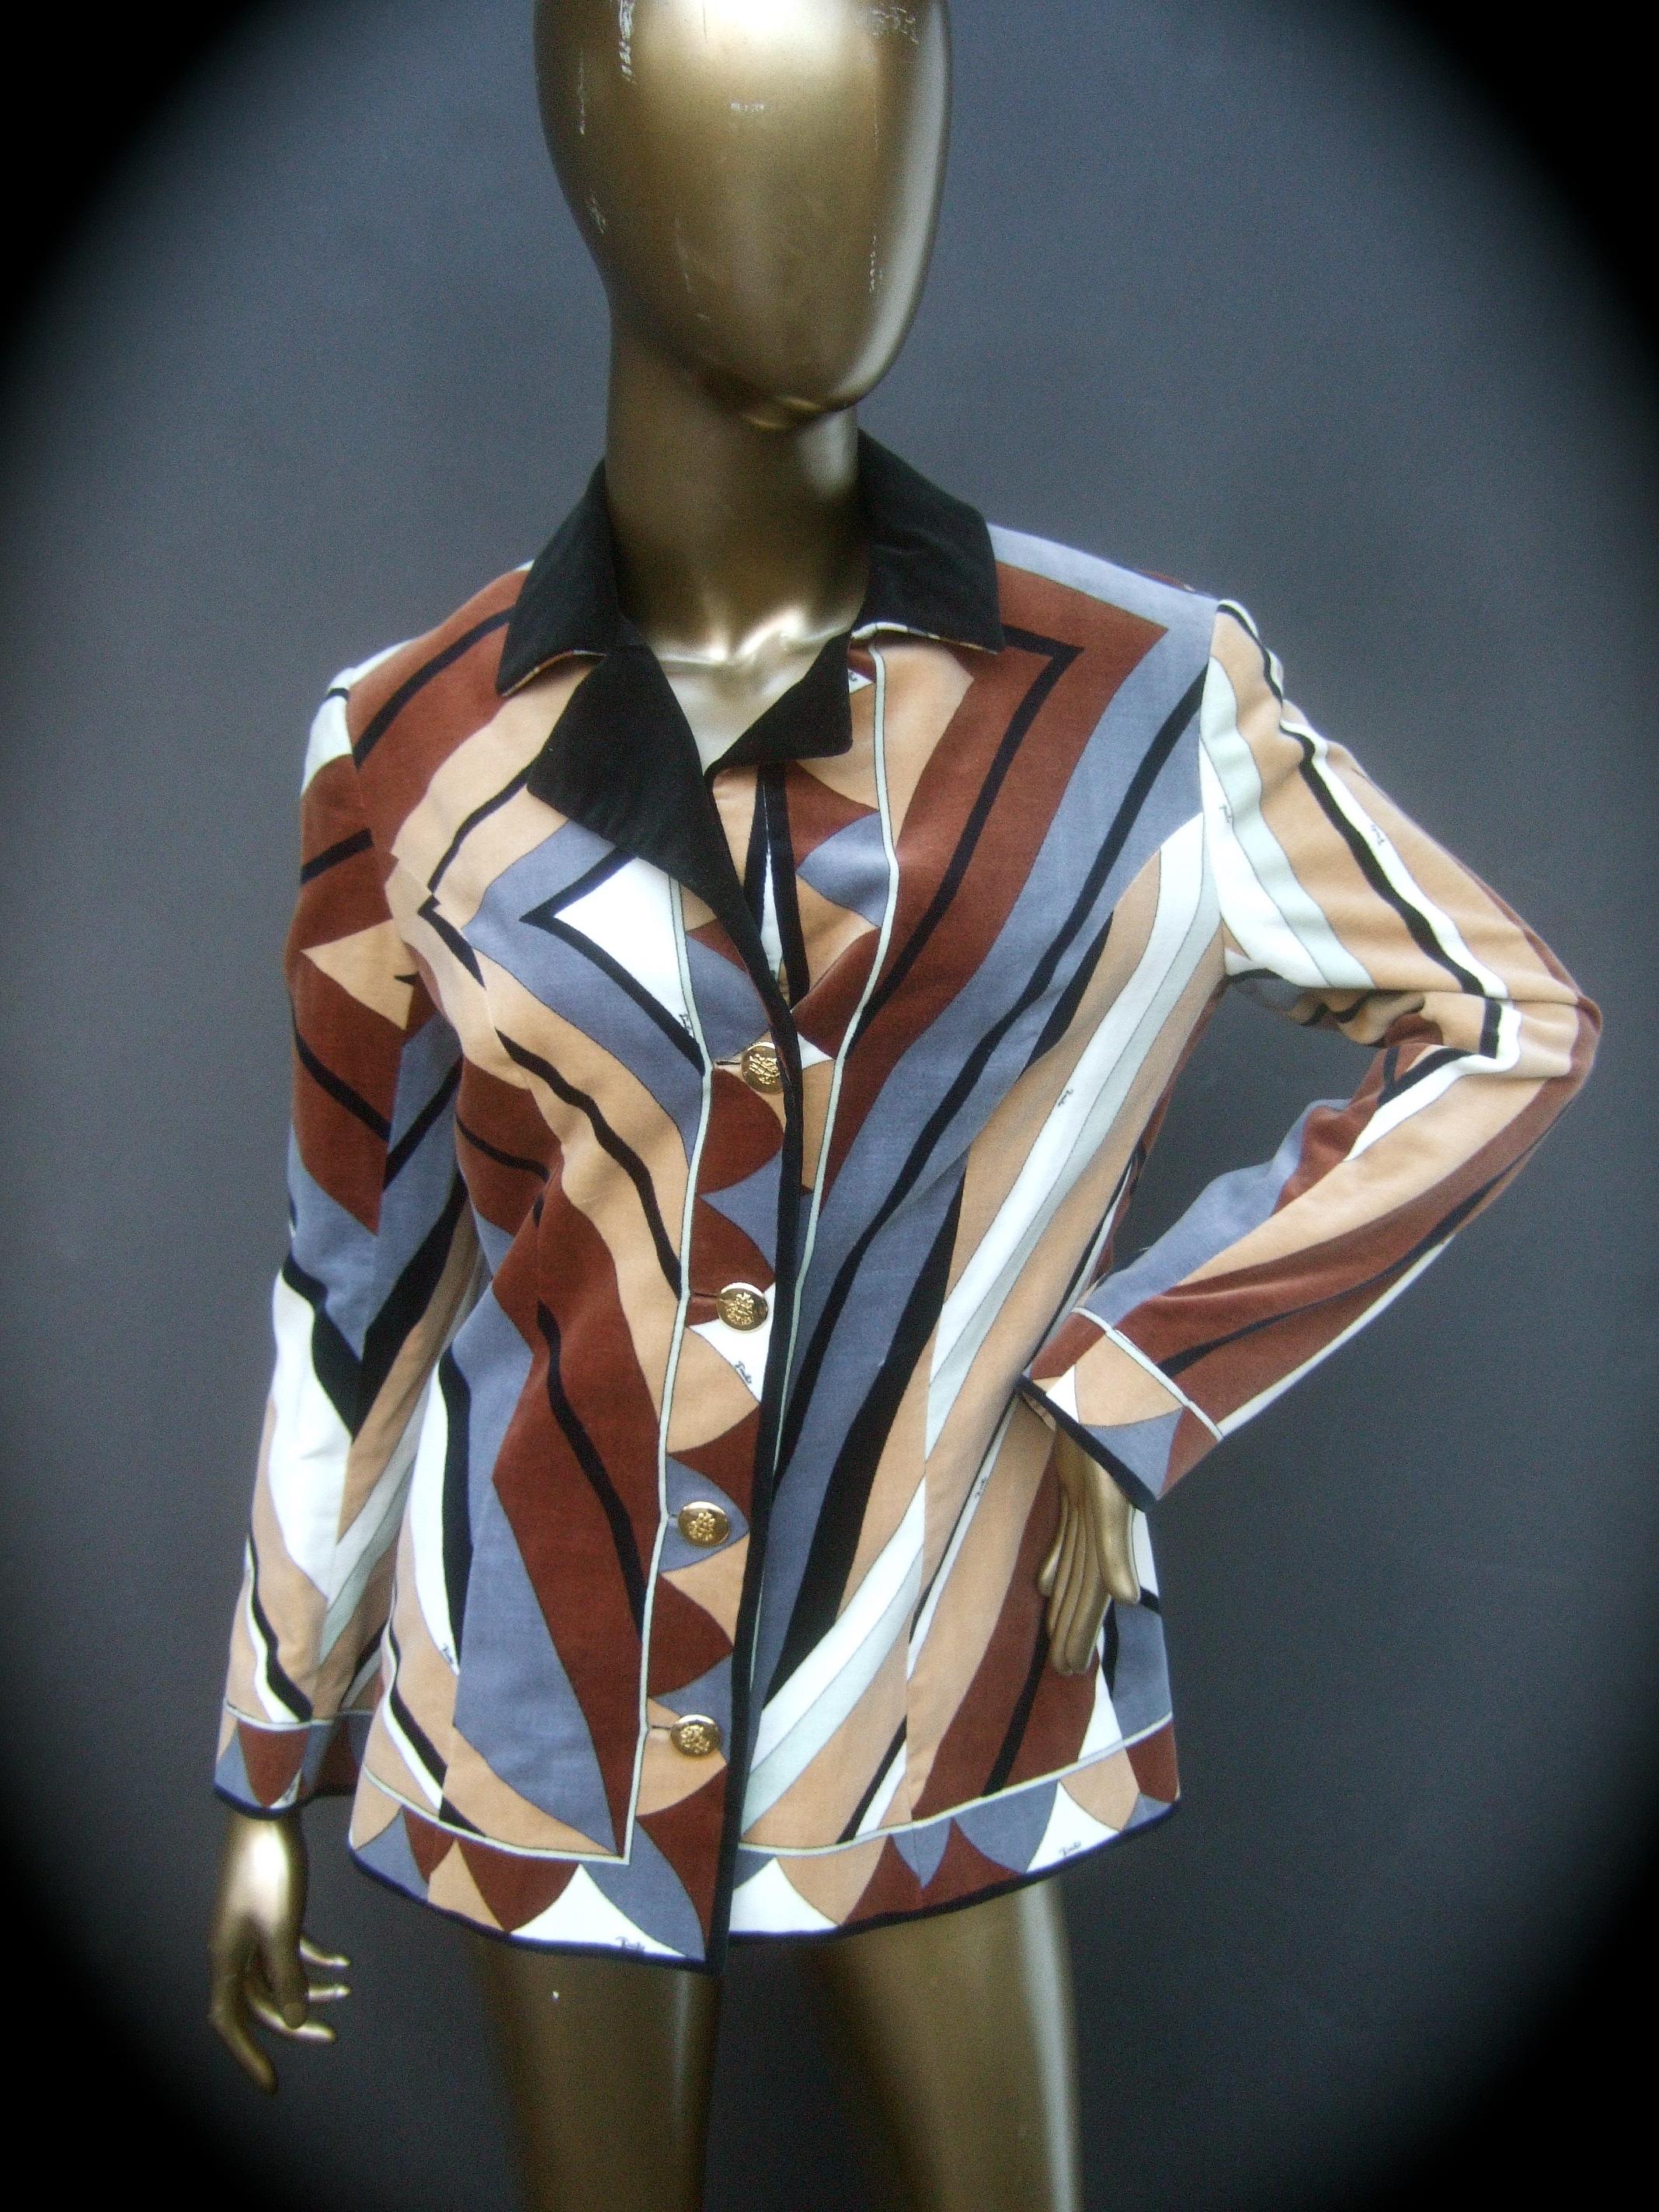 Emilio Pucci Mod cotton velvet print Italian jacket c 1970
The plush cotton velvet jacket is illustrated with a collage of linear and geometric graphic designs in earth tone hues. Emilio's script name is scattered throughout the bold graphic print